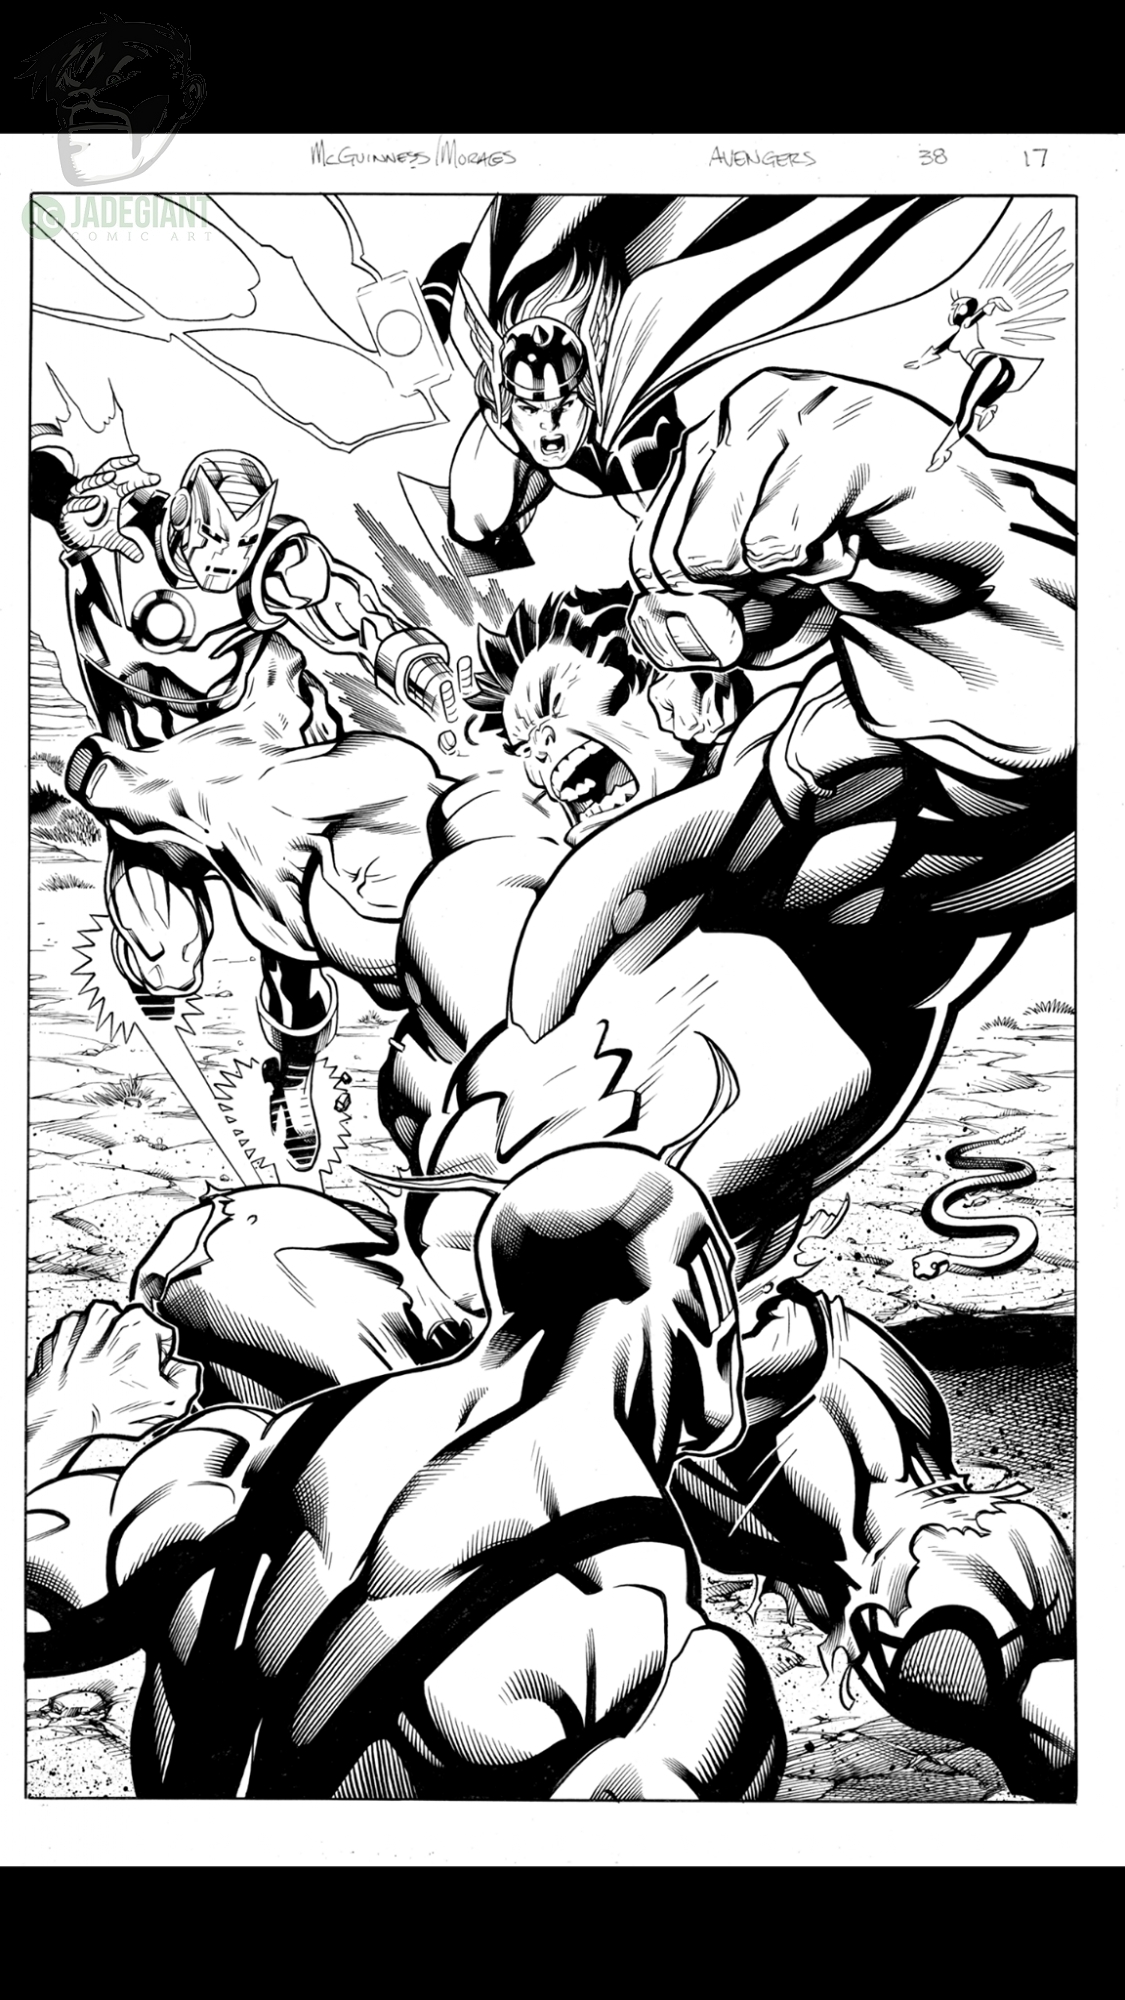 WANTED Ed McGuinness Mark Morales Avengers issue 38 vs Hulk page Comic Art